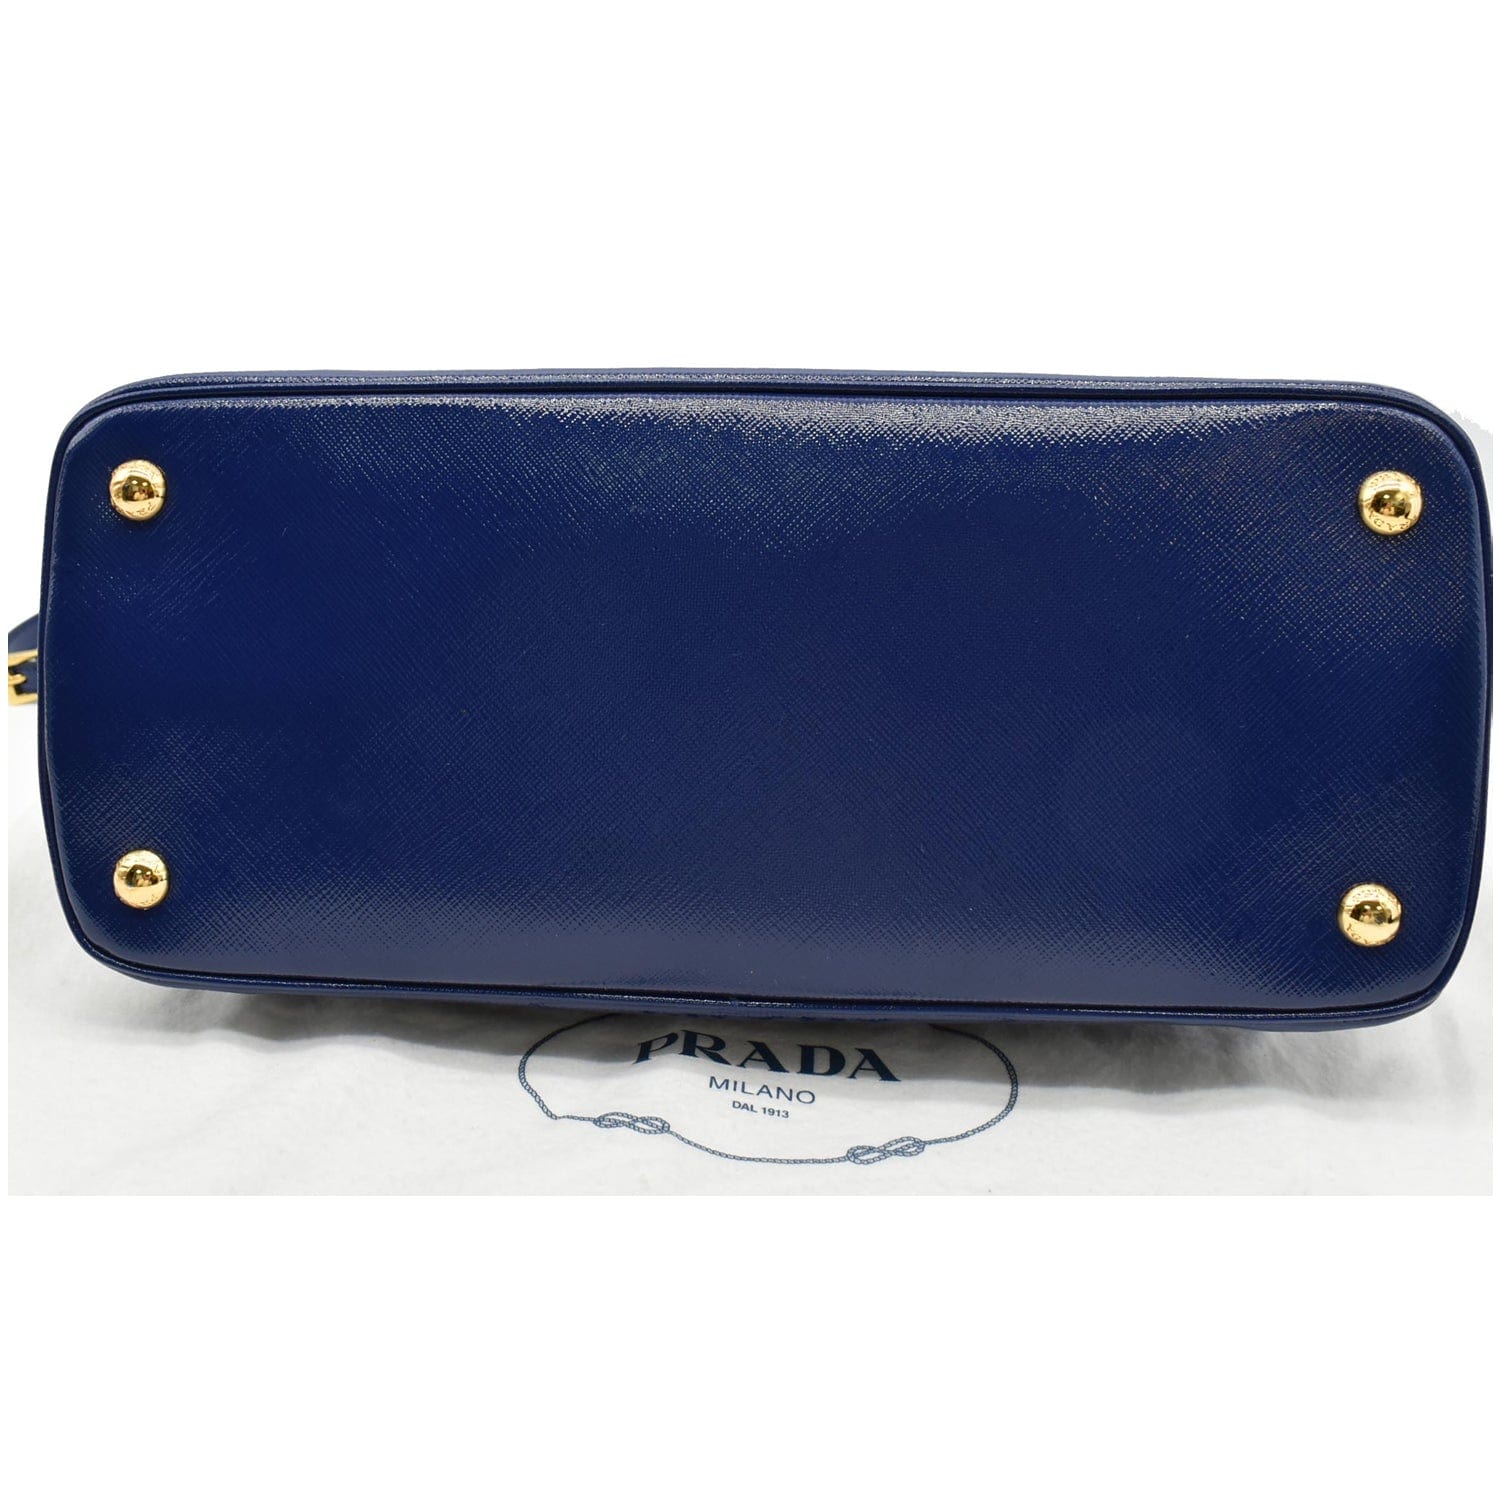 PRADA Zaffiano Vernice Top Handle Bag in Blue - More Than You Can